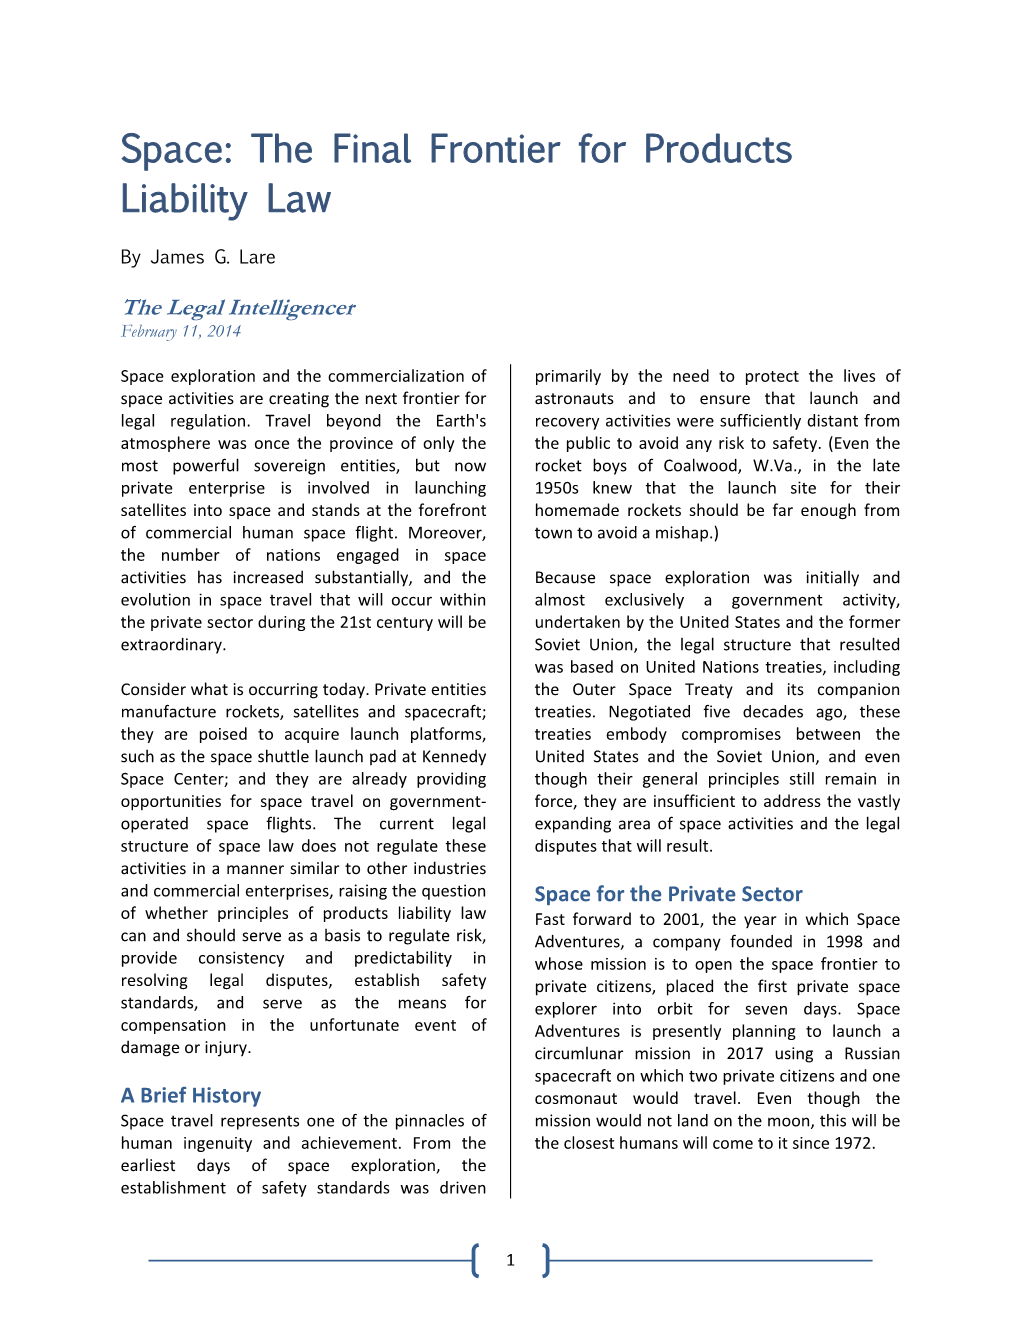 Space: the Final Frontier for Products Liability Law